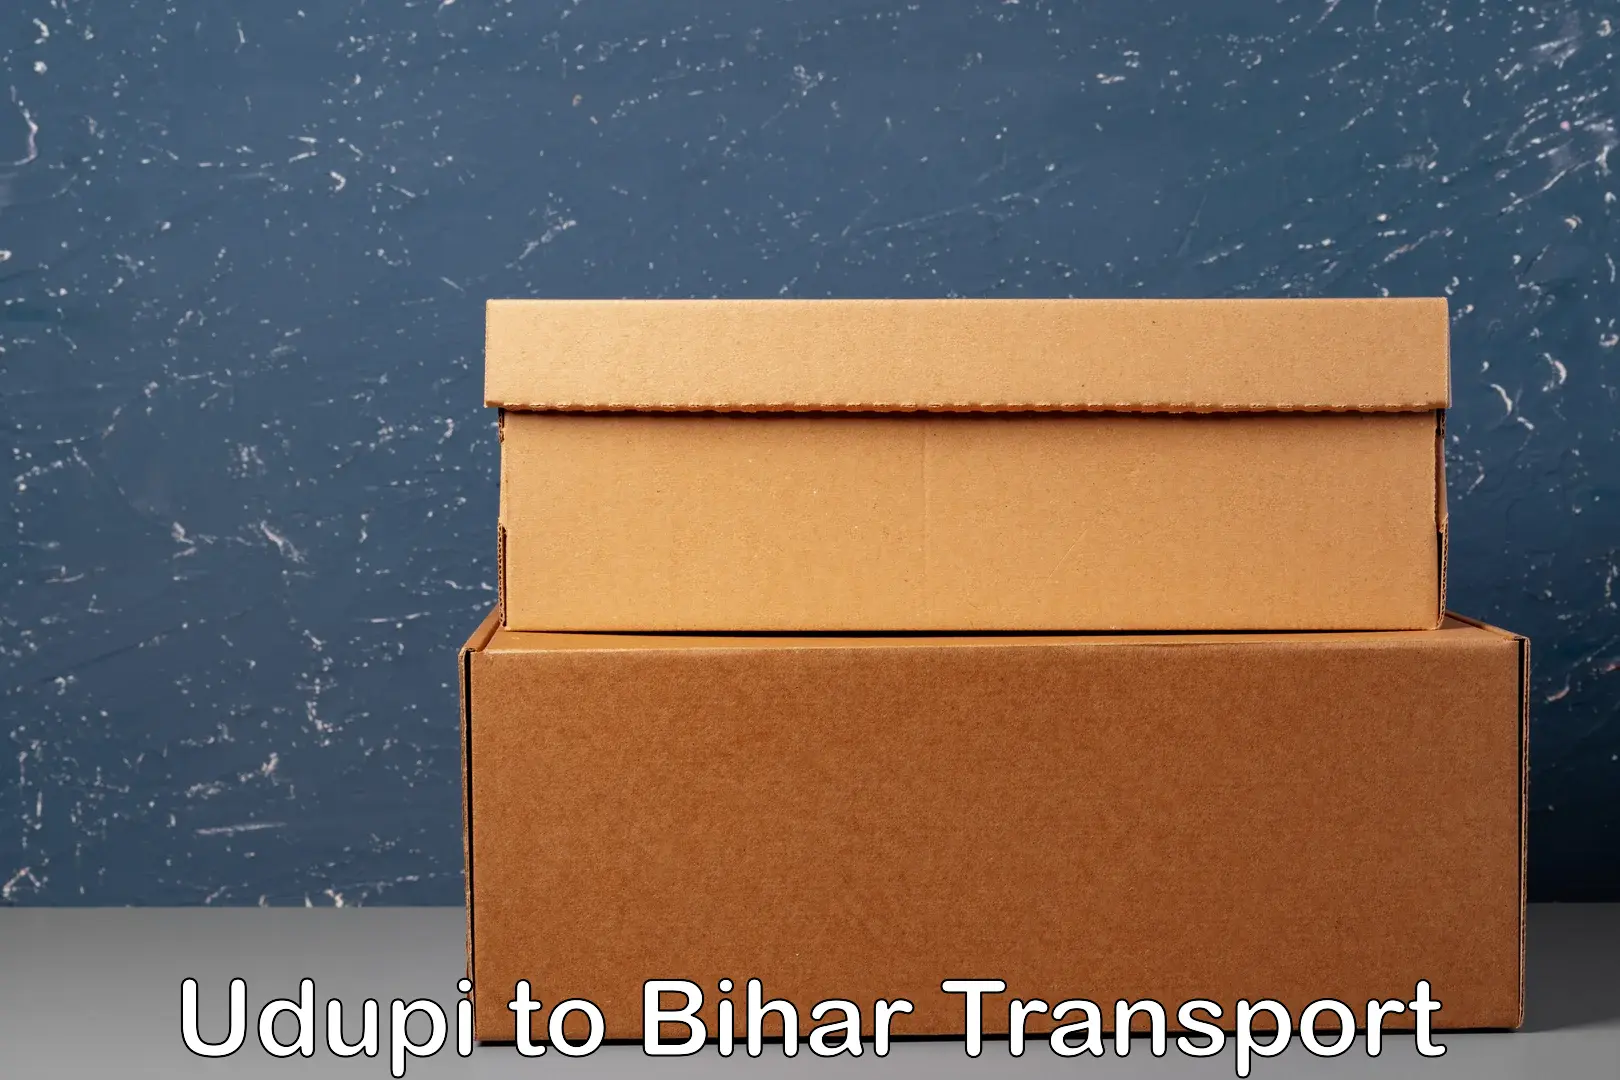 Container transport service in Udupi to Basopatti